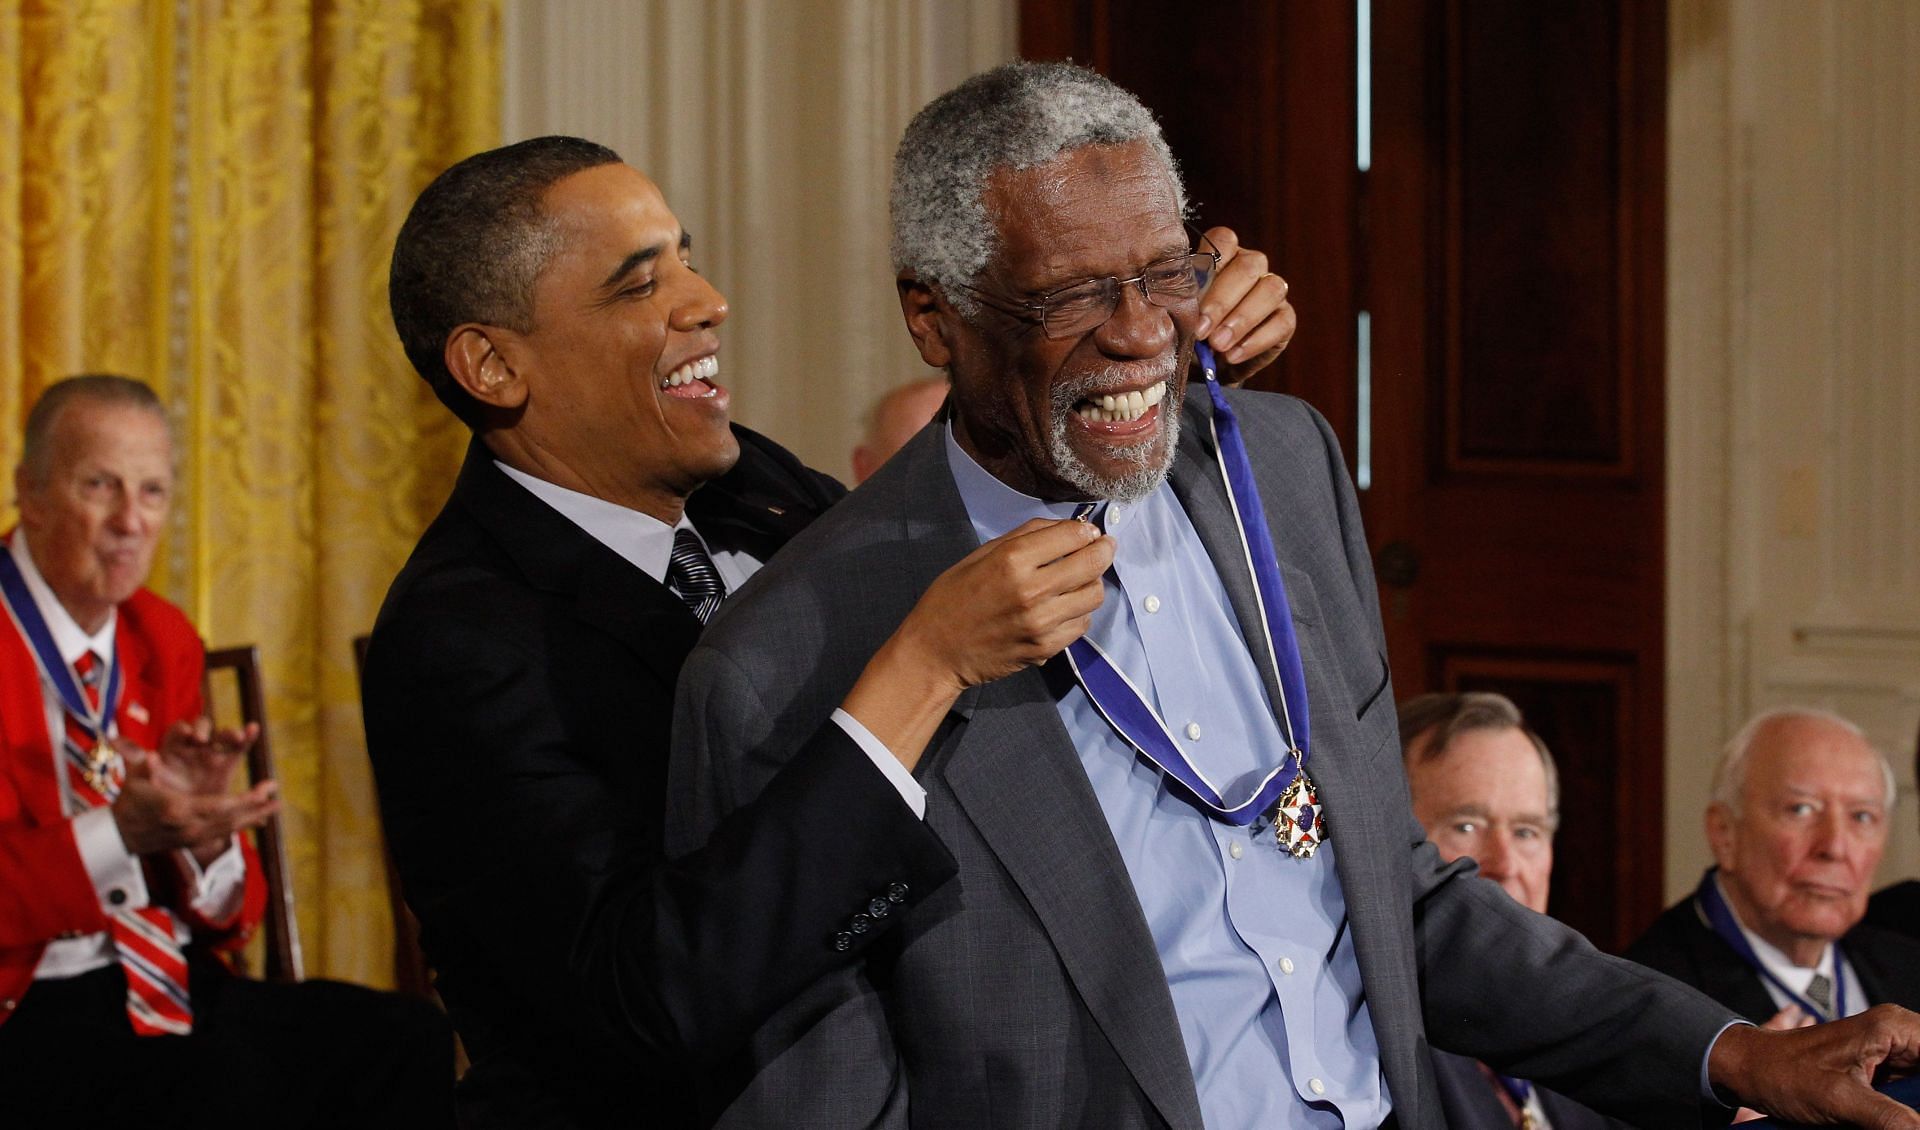 Barack Obama awards the Presidential Medal Of Freedom to Bill Russell in 2011.